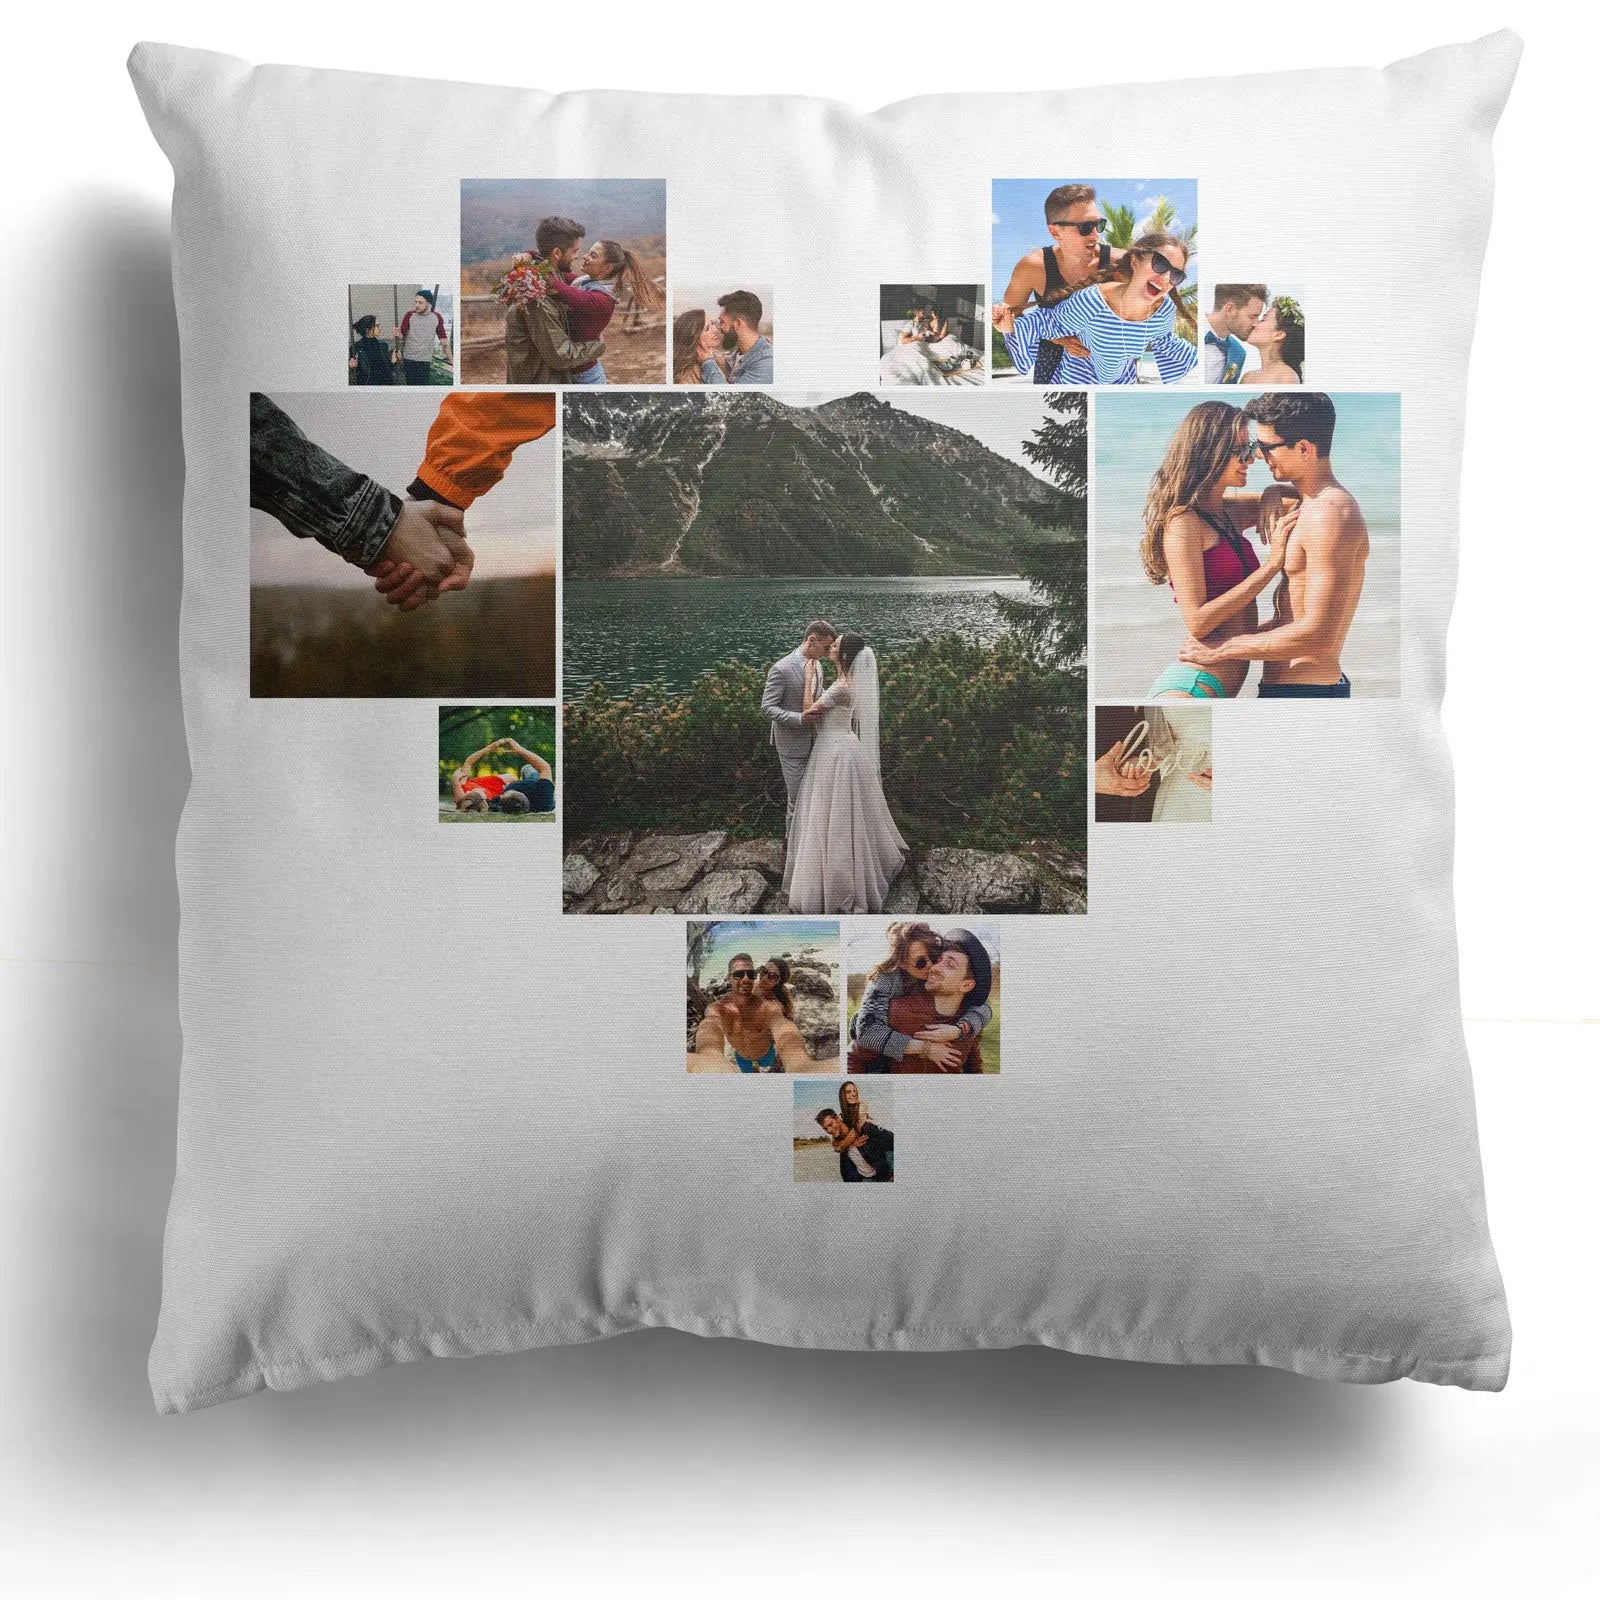 Personalised Cushion  Valentines Day  Couples & Romance  40x40cm  Heart - CushionPop